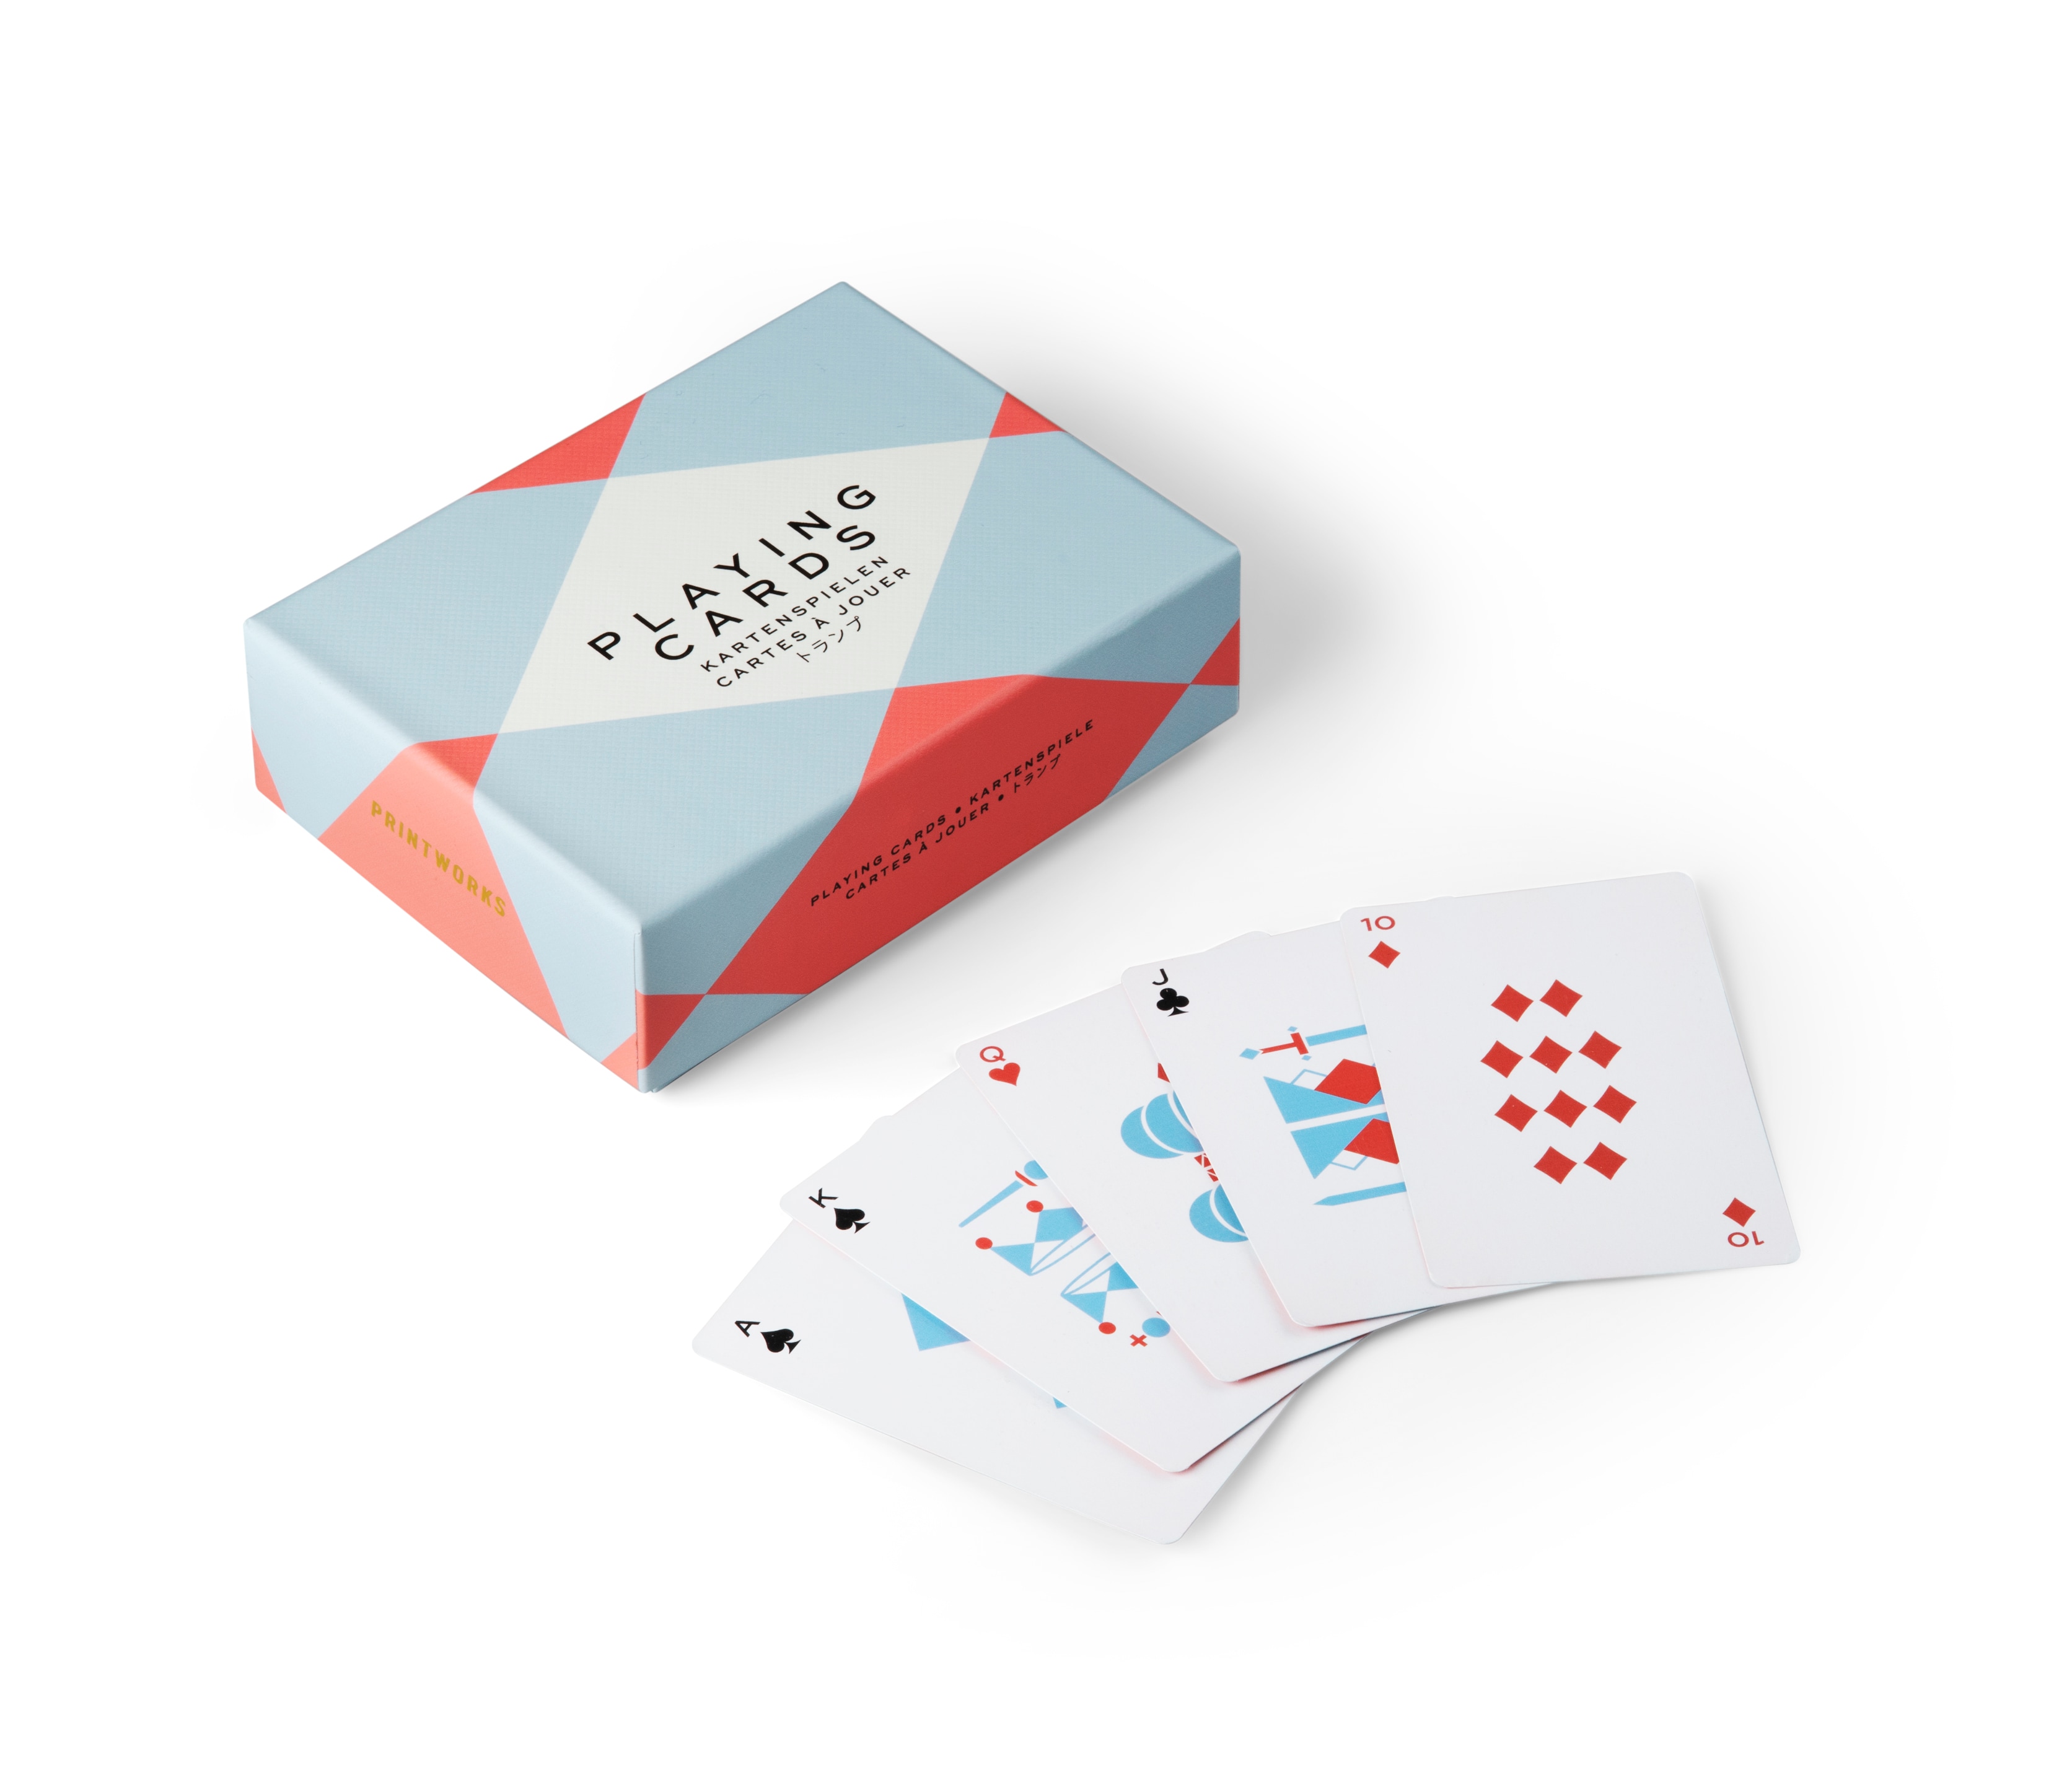 Play me - Playing cards